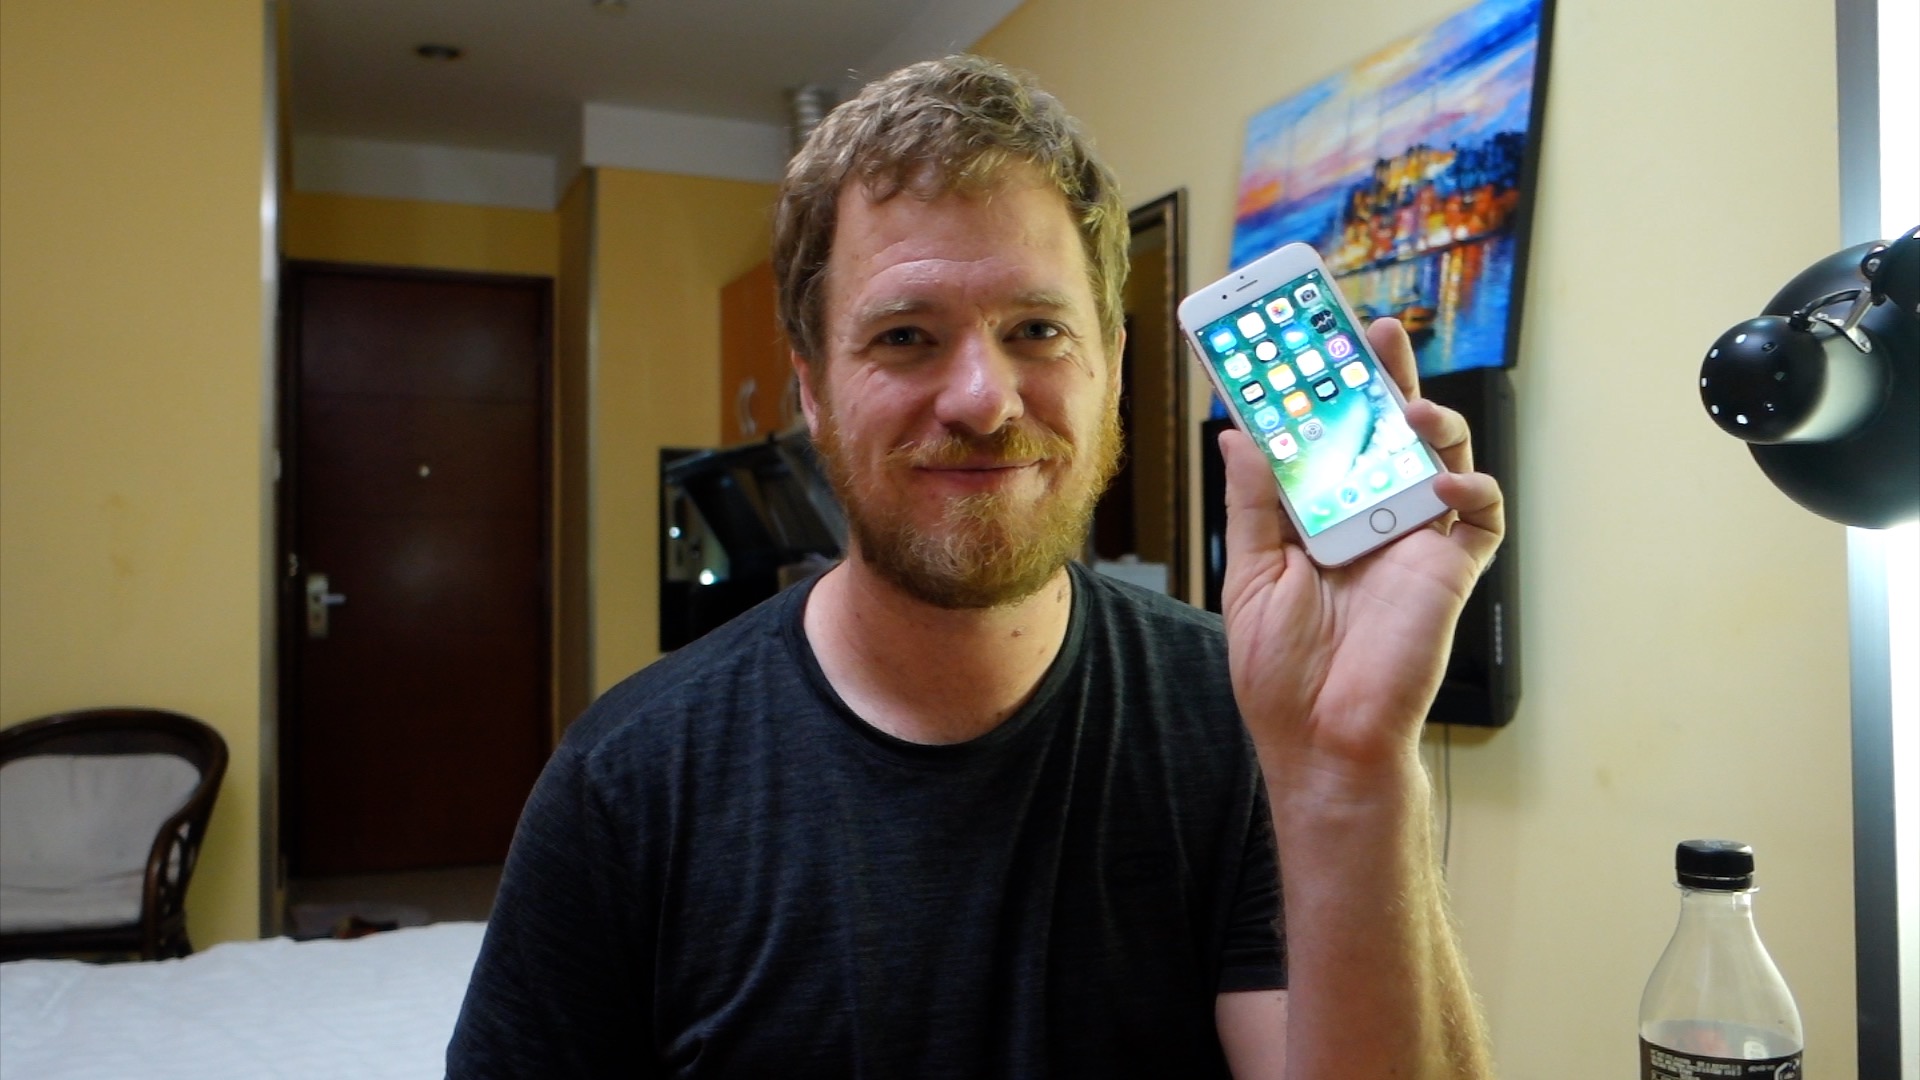 Watch How a Man Builds DIY iPhone 6S For $300